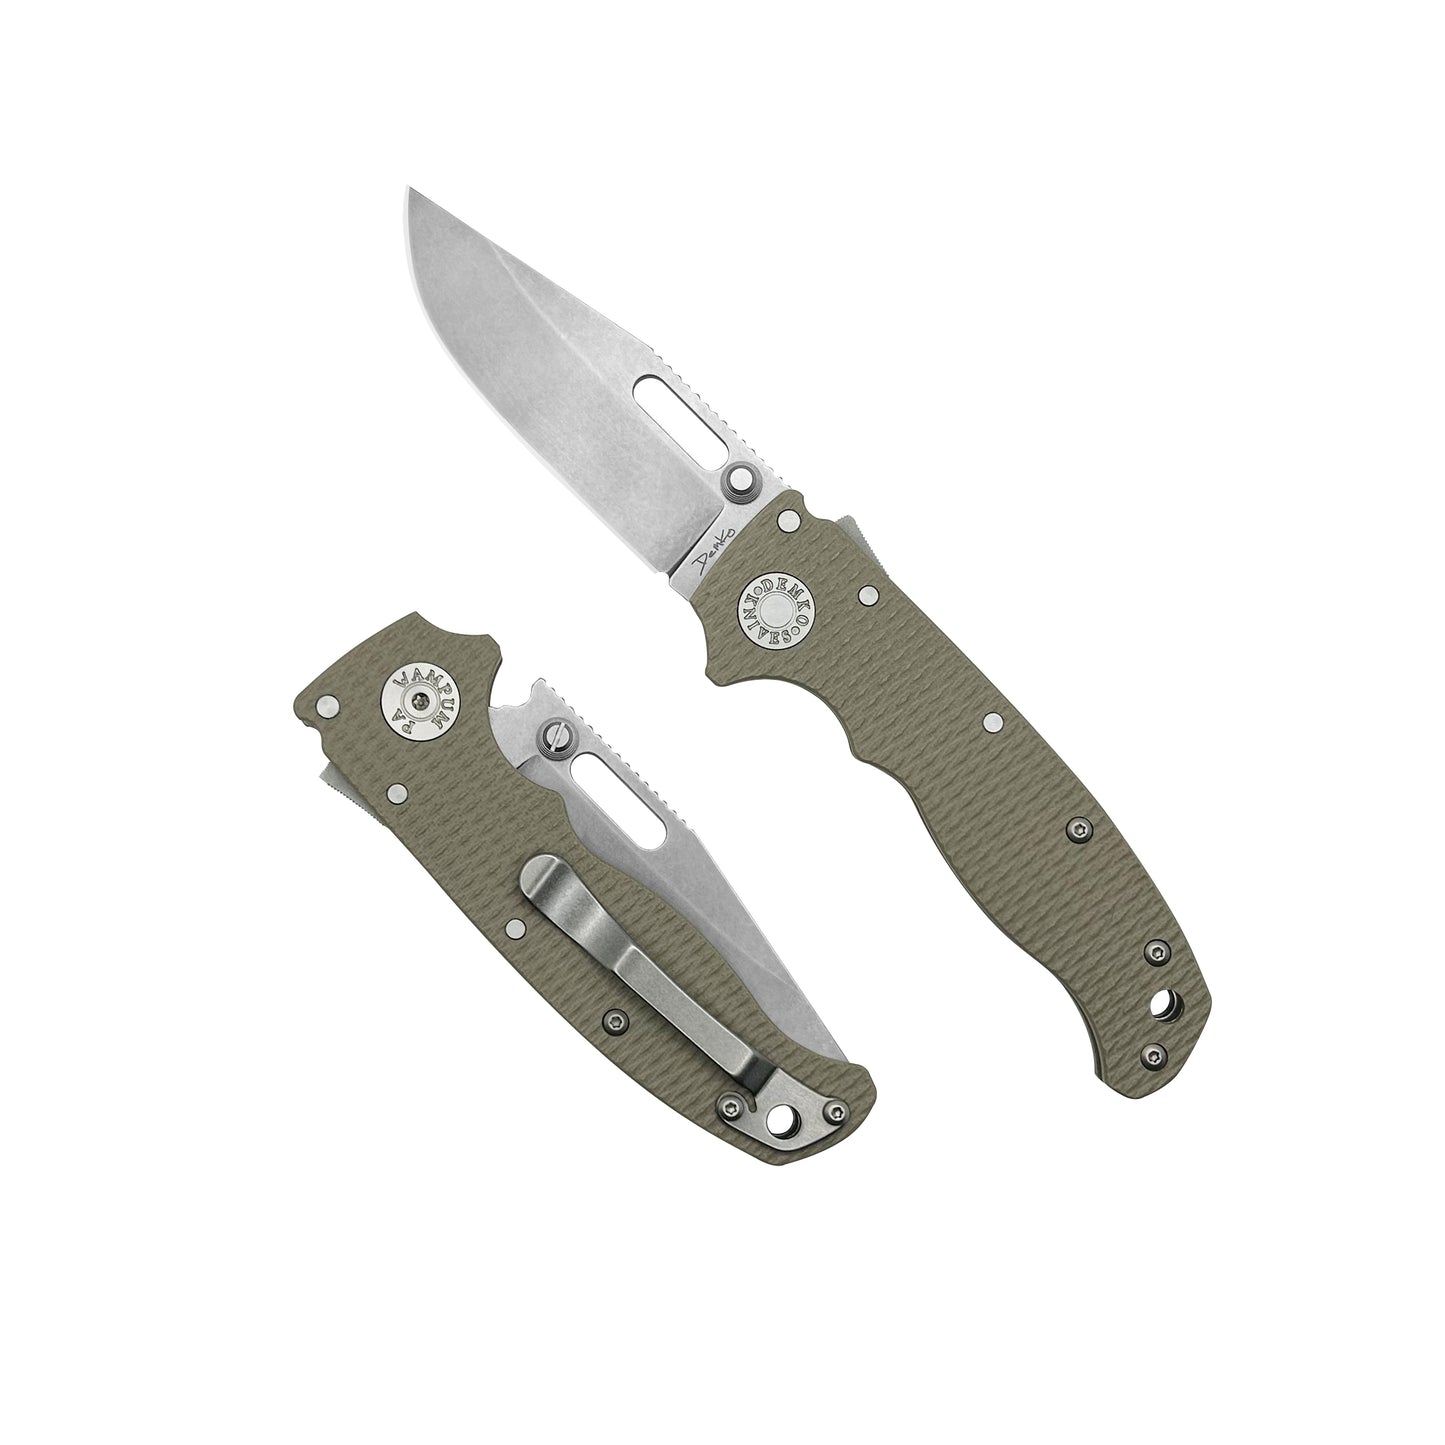 AD20.5 - S35VN - Coyote Tan G10